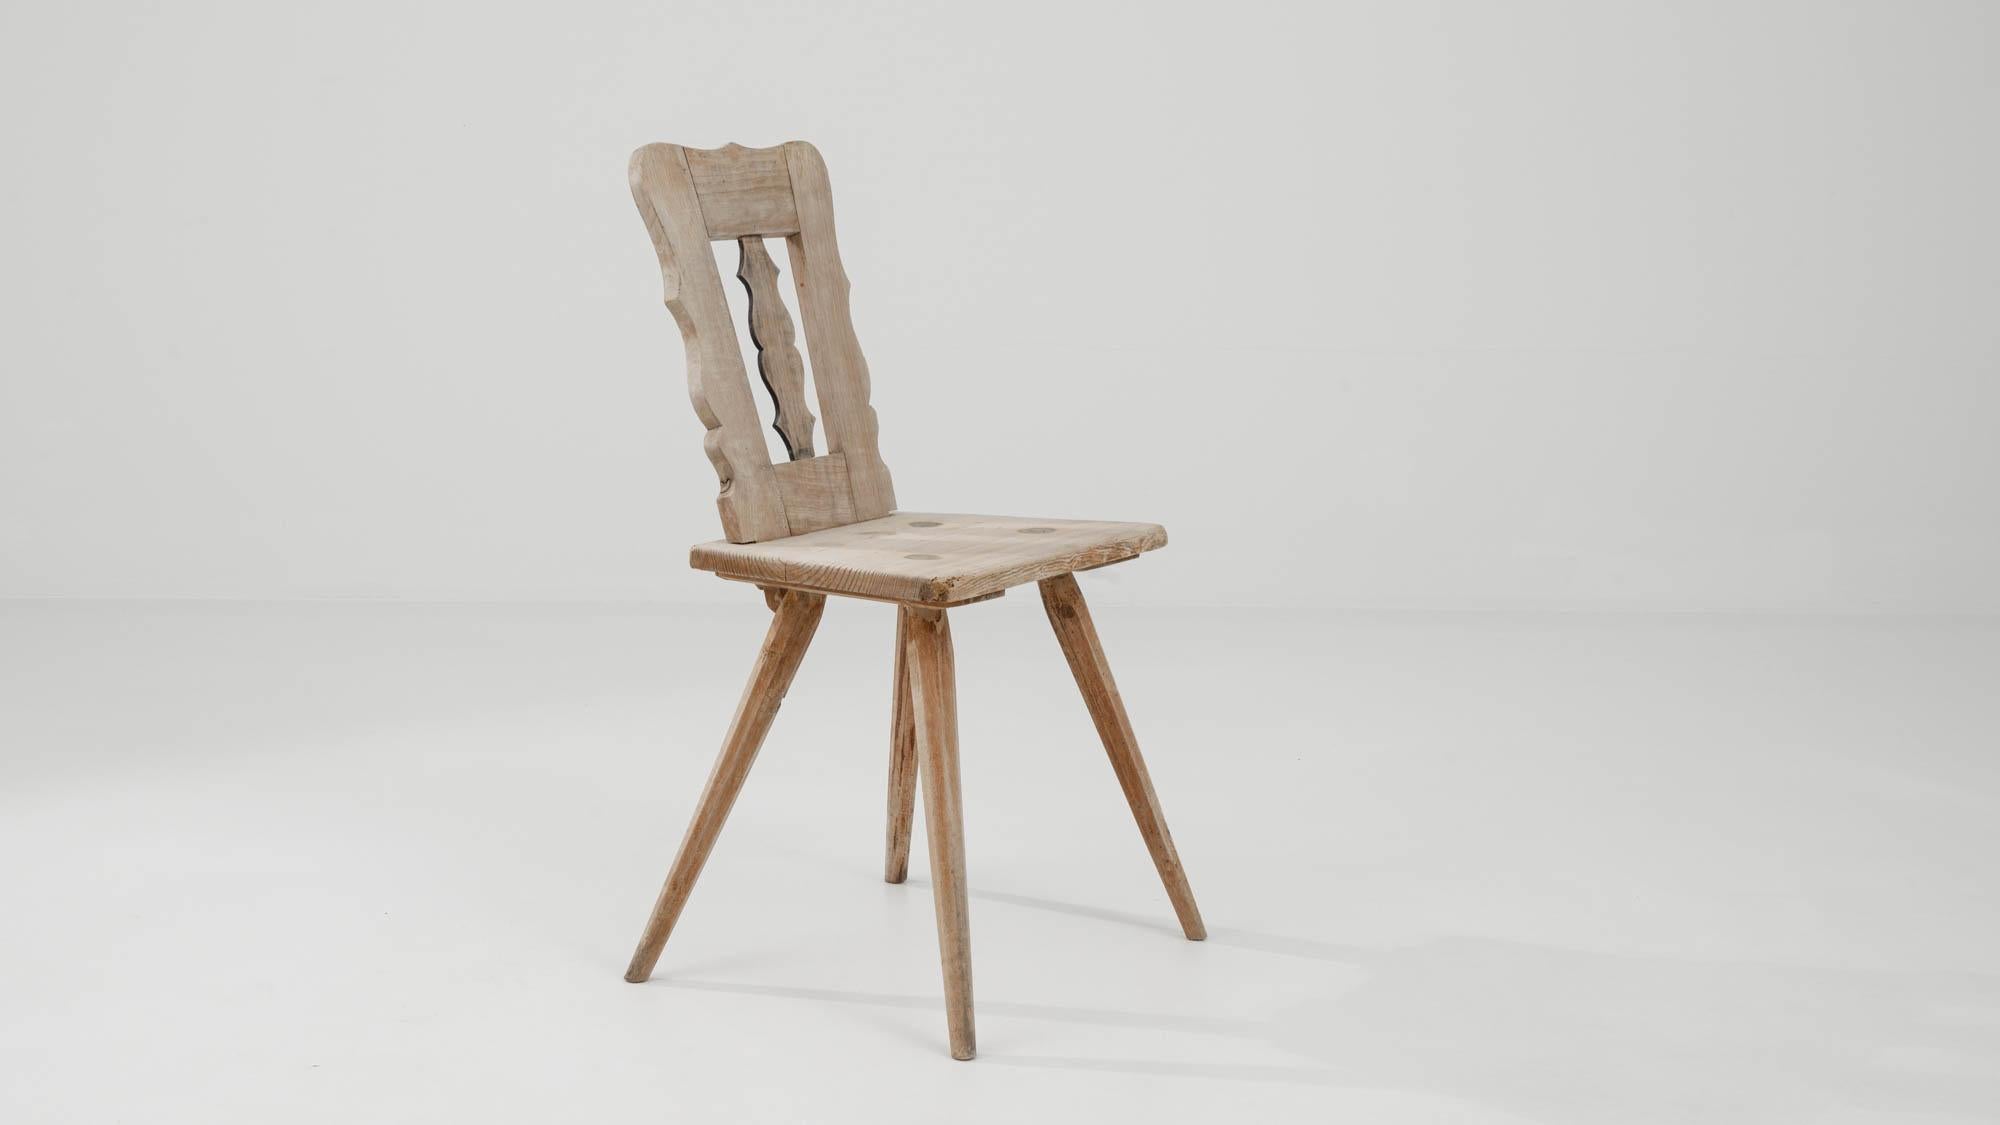 Rustic French Wooden Chair 4